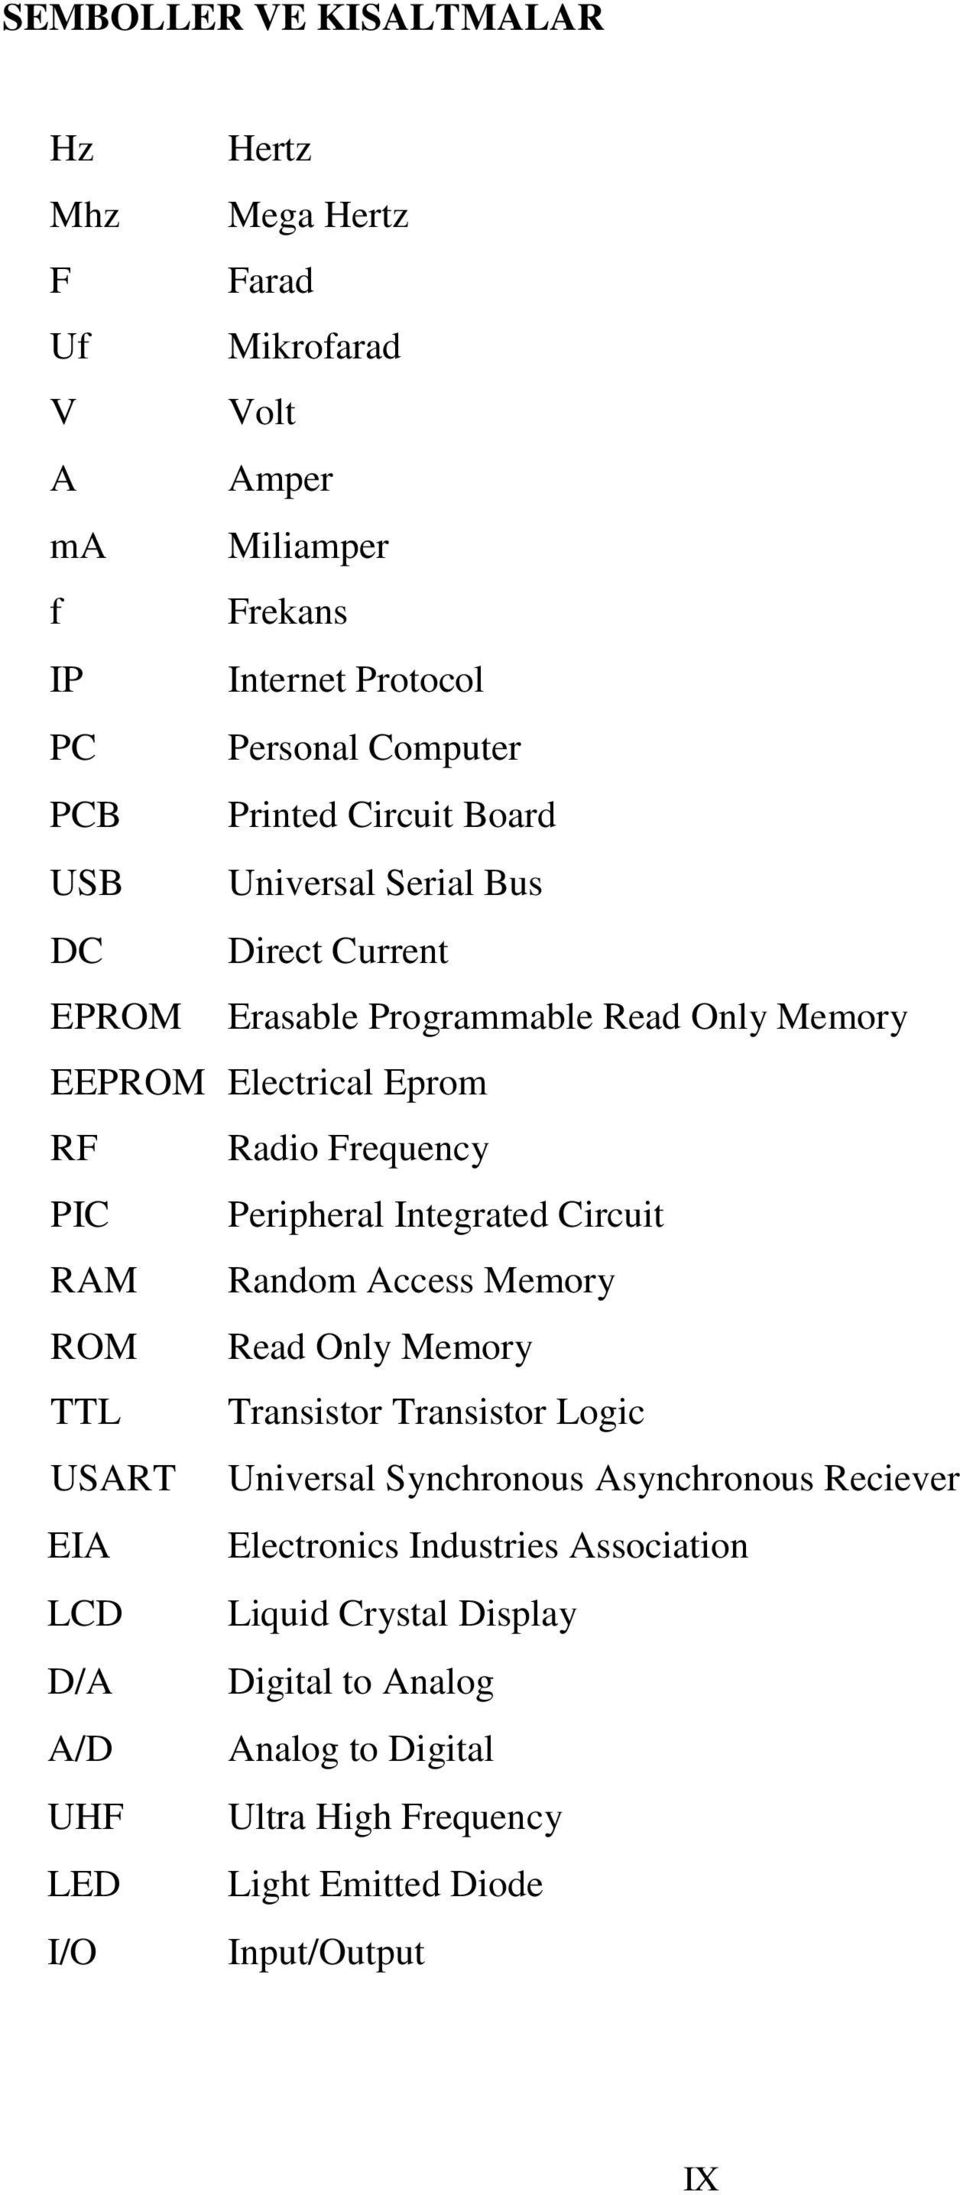 Peripheral Integrated Circuit RAM Random Access Memory ROM Read Only Memory TTL Transistor Transistor Logic USART Universal Synchronous Asynchronous Reciever EIA